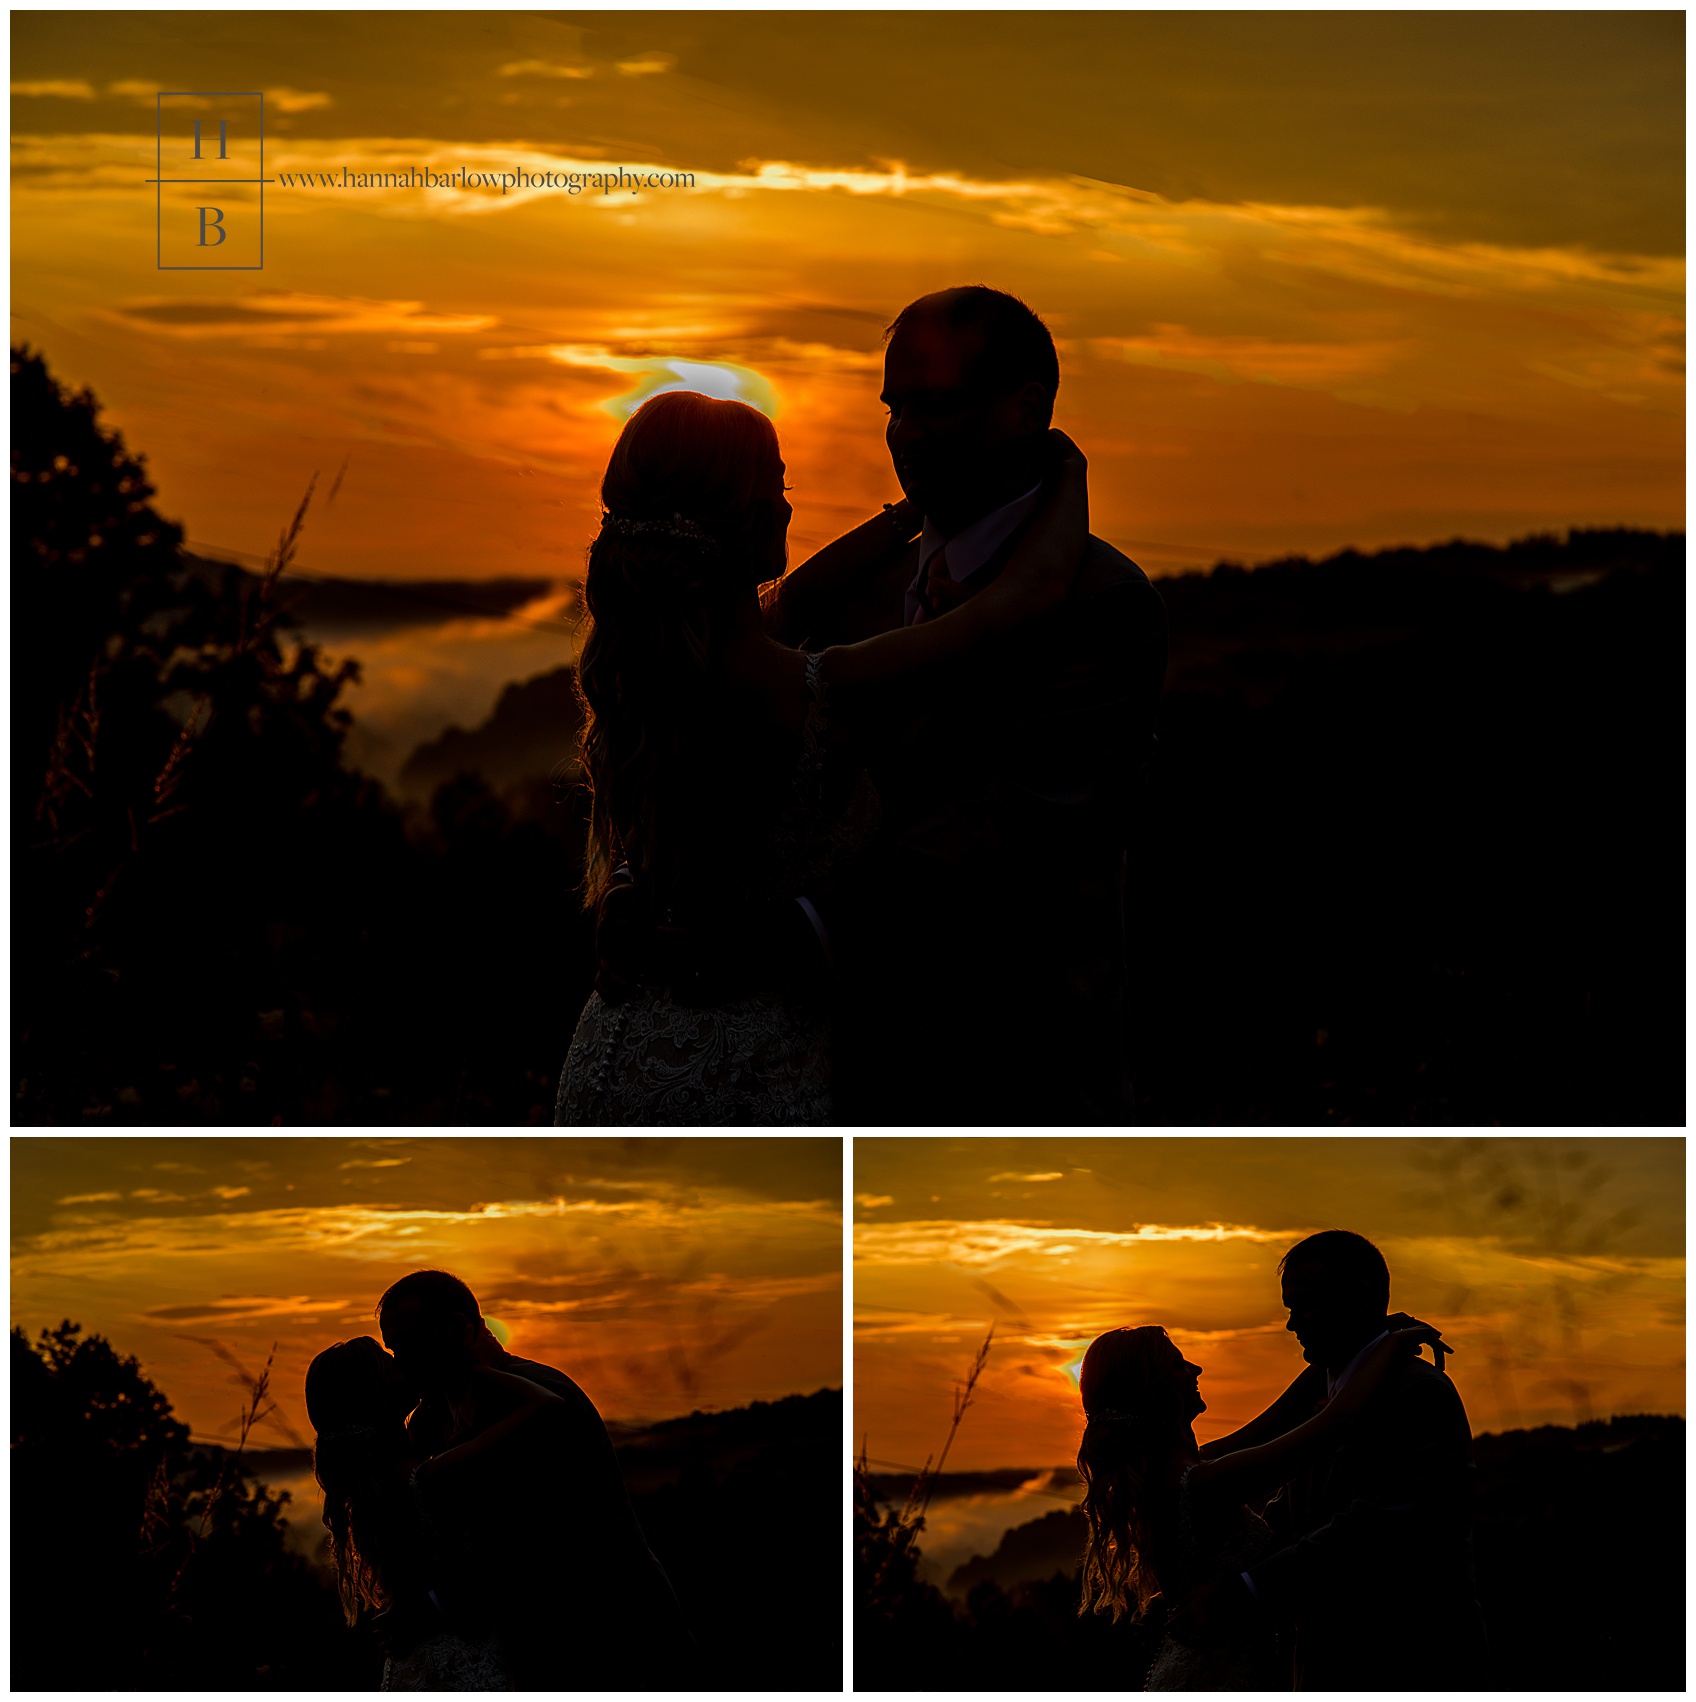 Bride and Groom Sunset Silhouette Photos